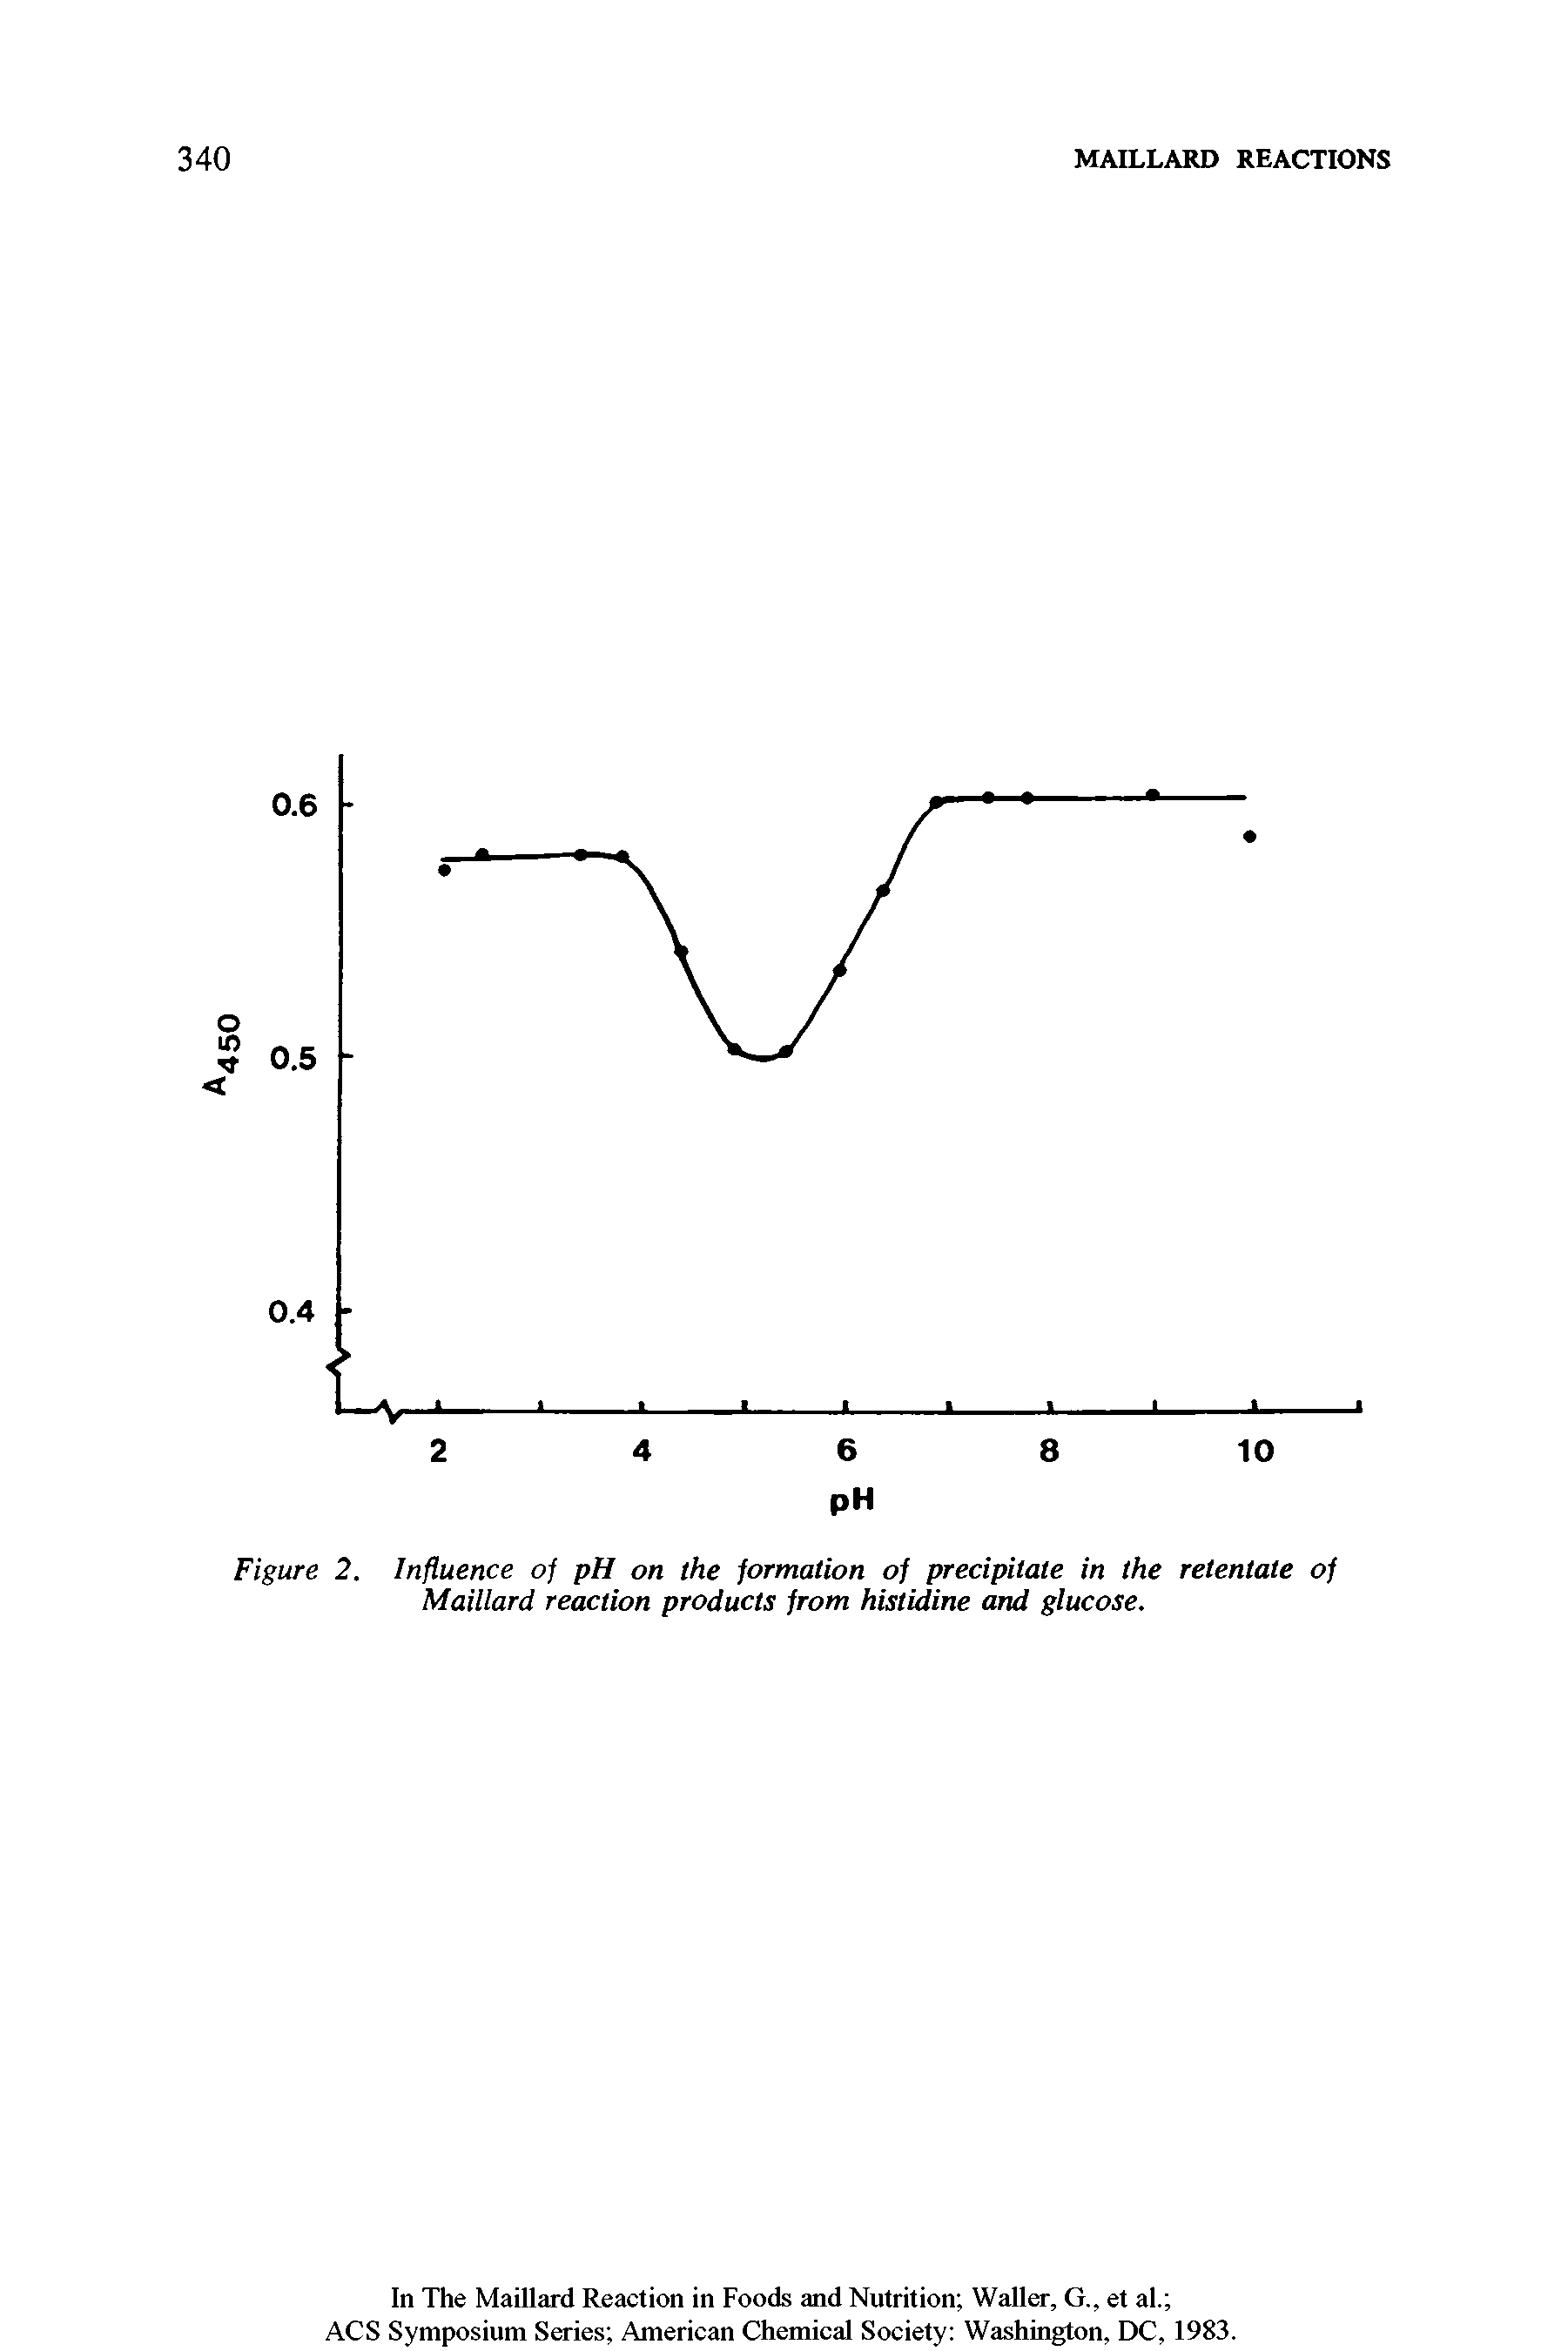 Figure 2. Influence of pH on the formation of precipitate in the retentate of Maillard reaction products from histidine and glucose.